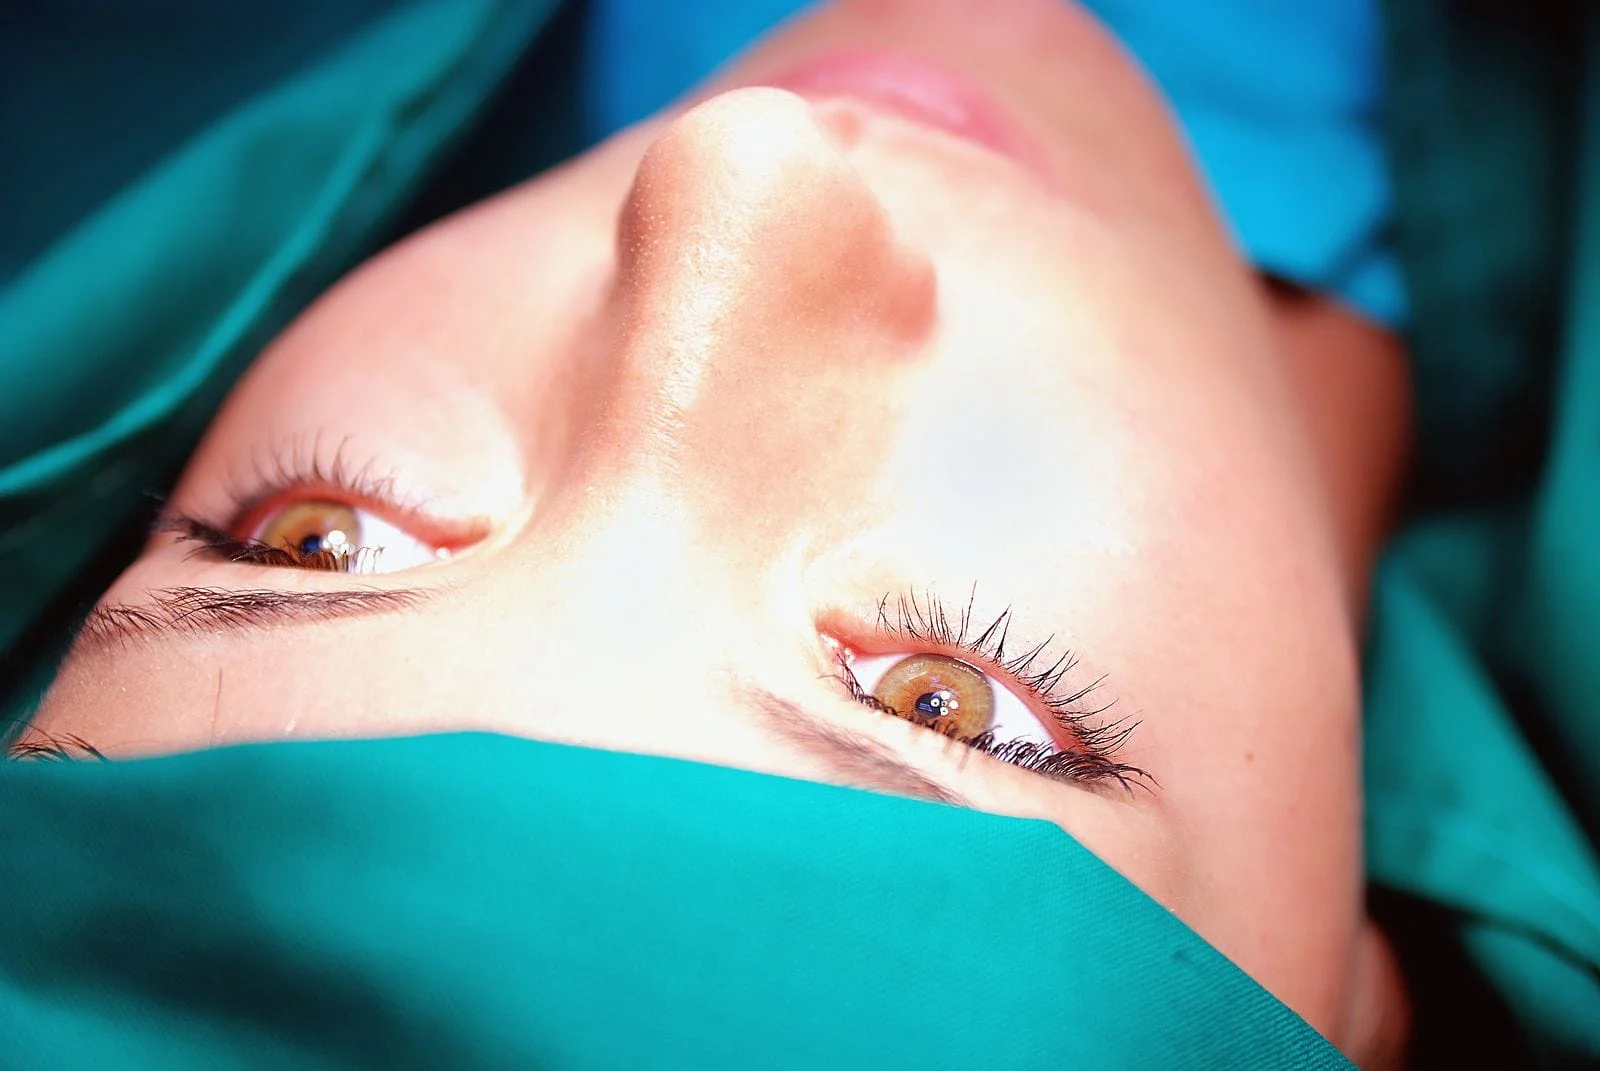 Botox cosmetic provides a temporary solution for both cosmetic concerns and certain eye conditions. Call our Naples ophthalmologist today to learn more!